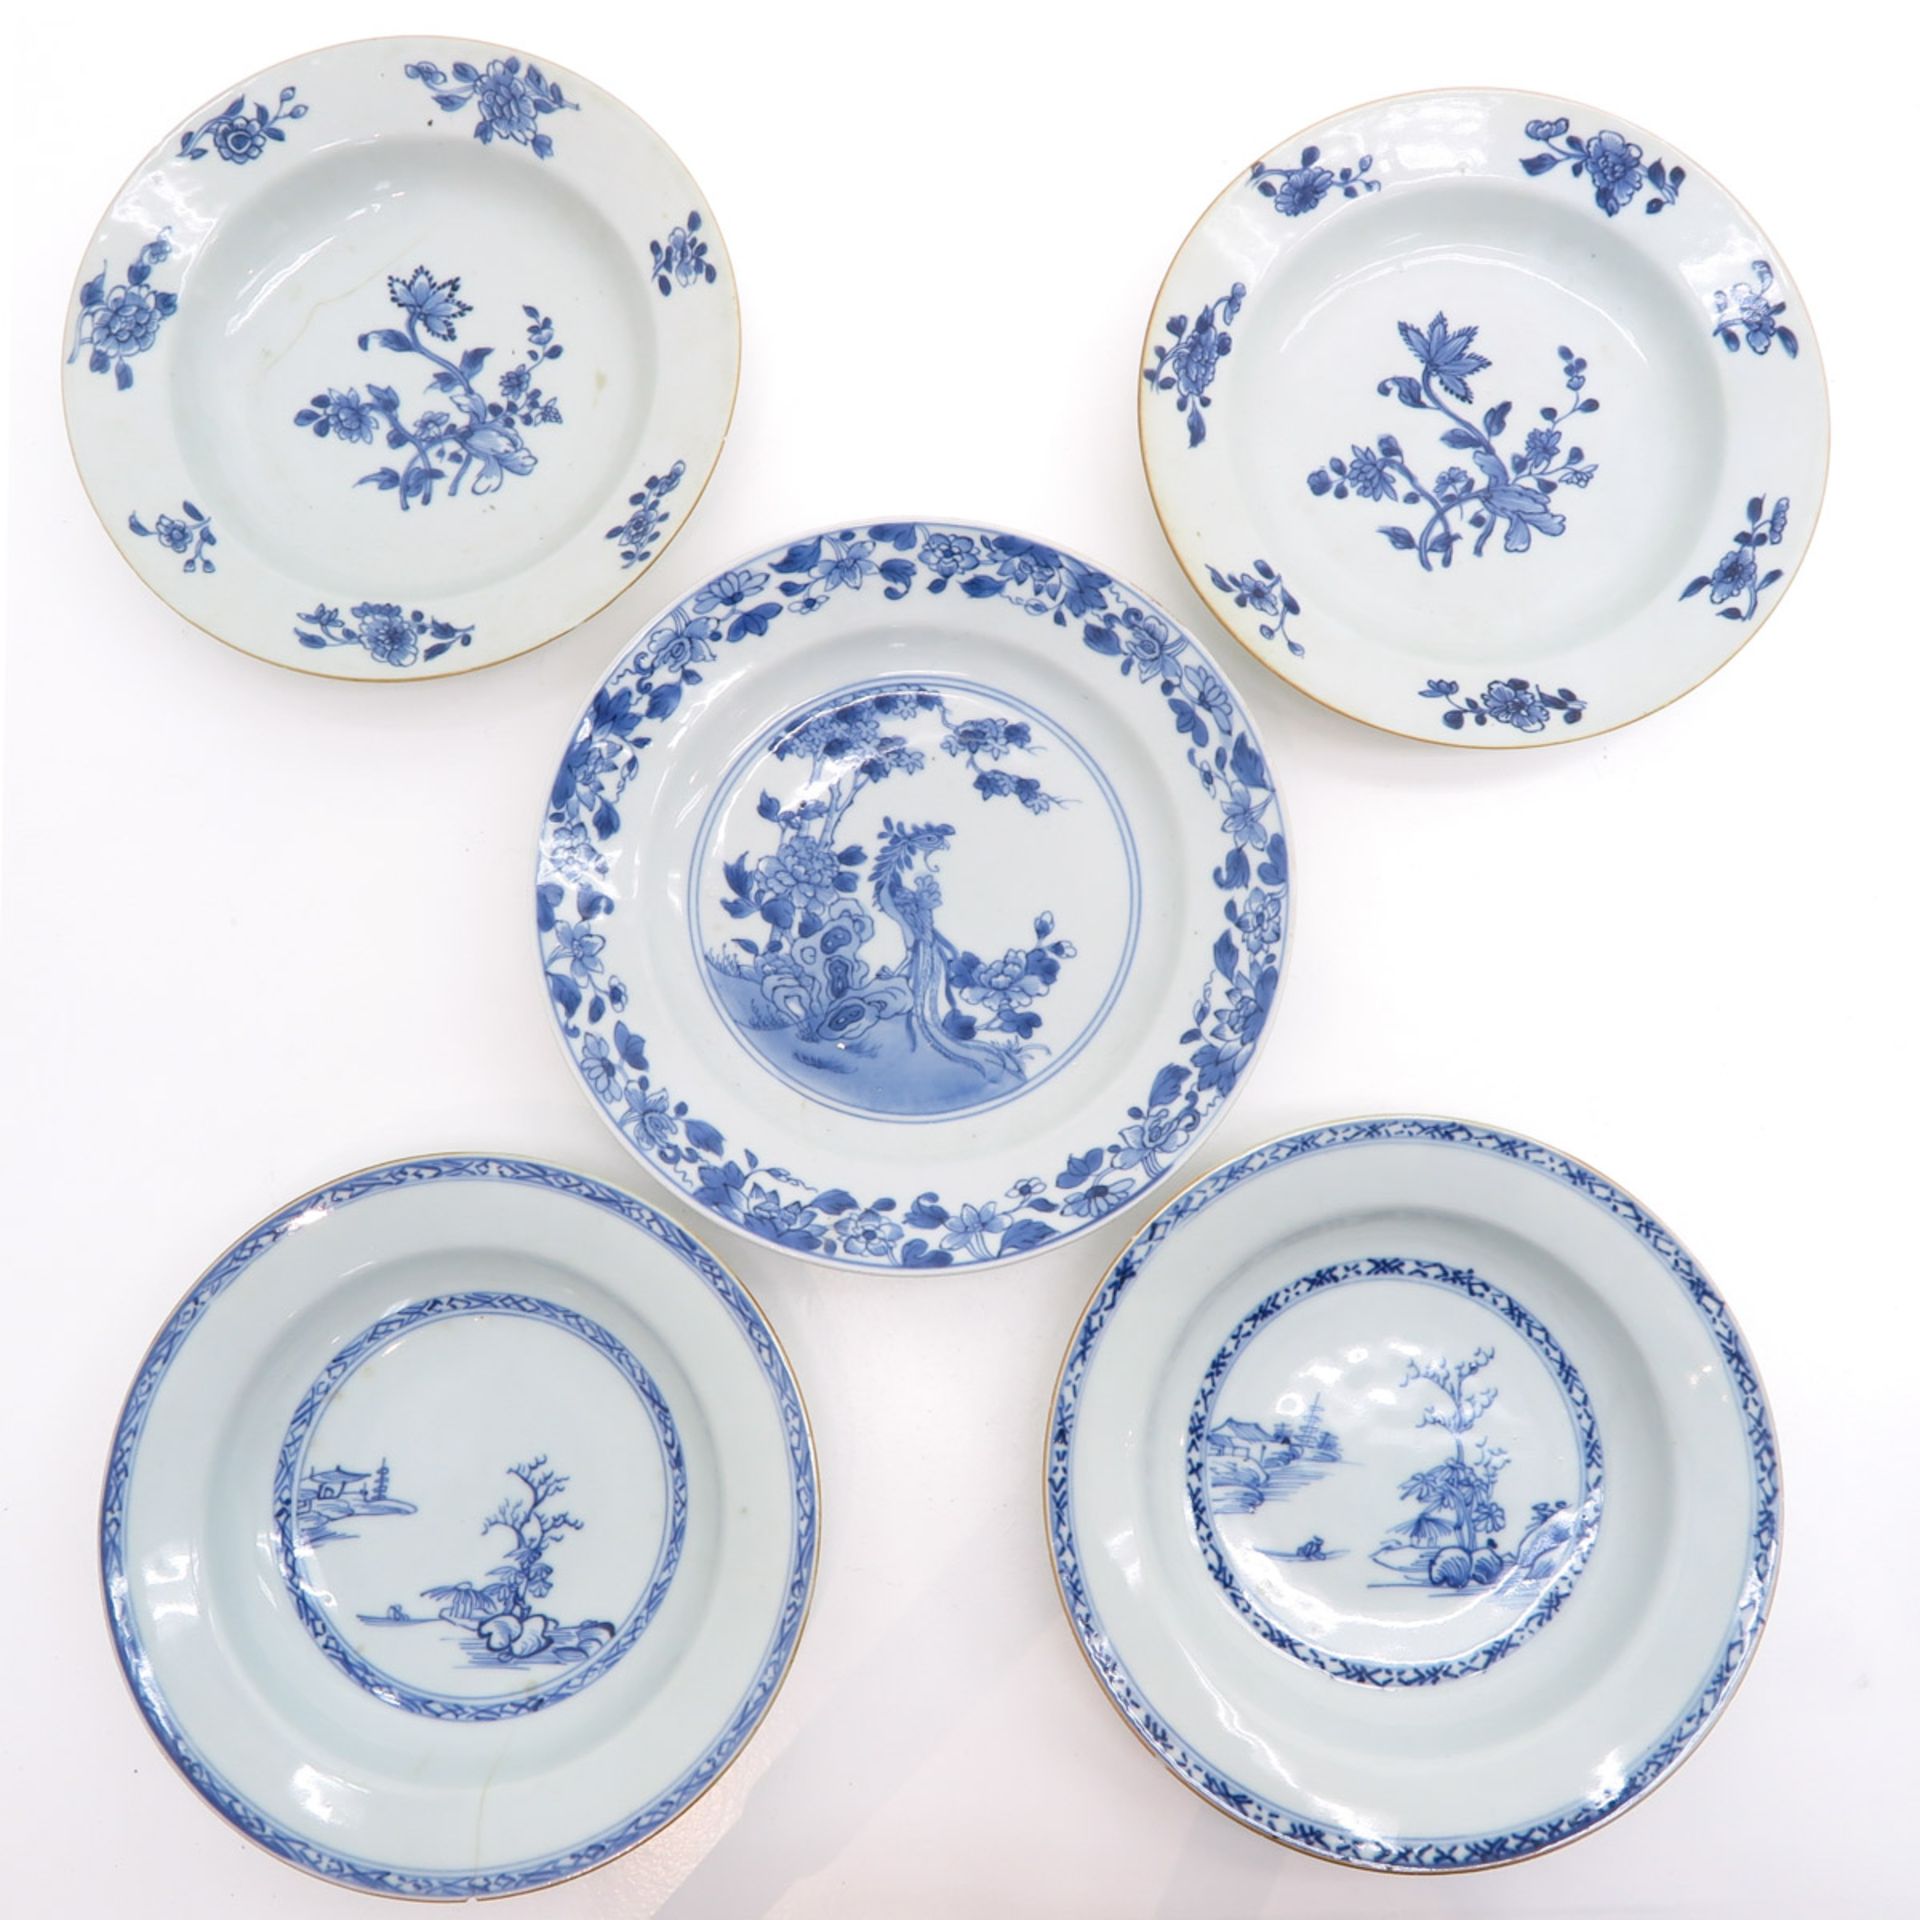 Lot of 16 18th Century China Porcelain Plates